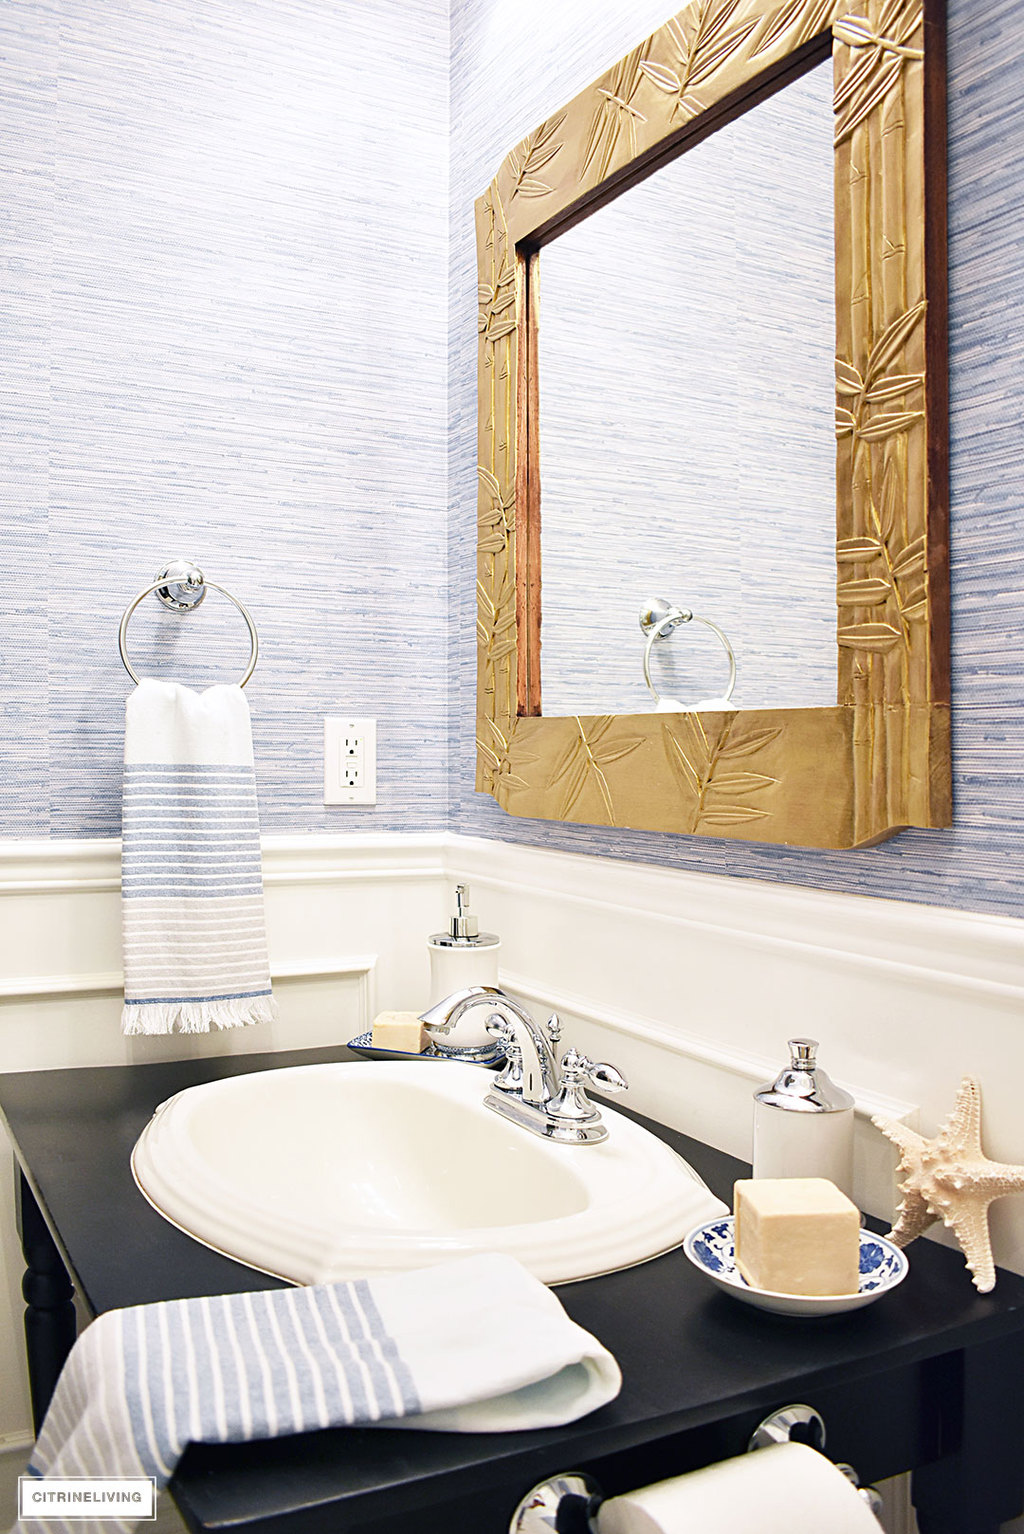 A timeless blue and white bathroom makeover featuring grasscloth, brass lighting, a blue and white striped shower curtain and blue and white accessories creates a sophisticated and elegant look in this small bath.